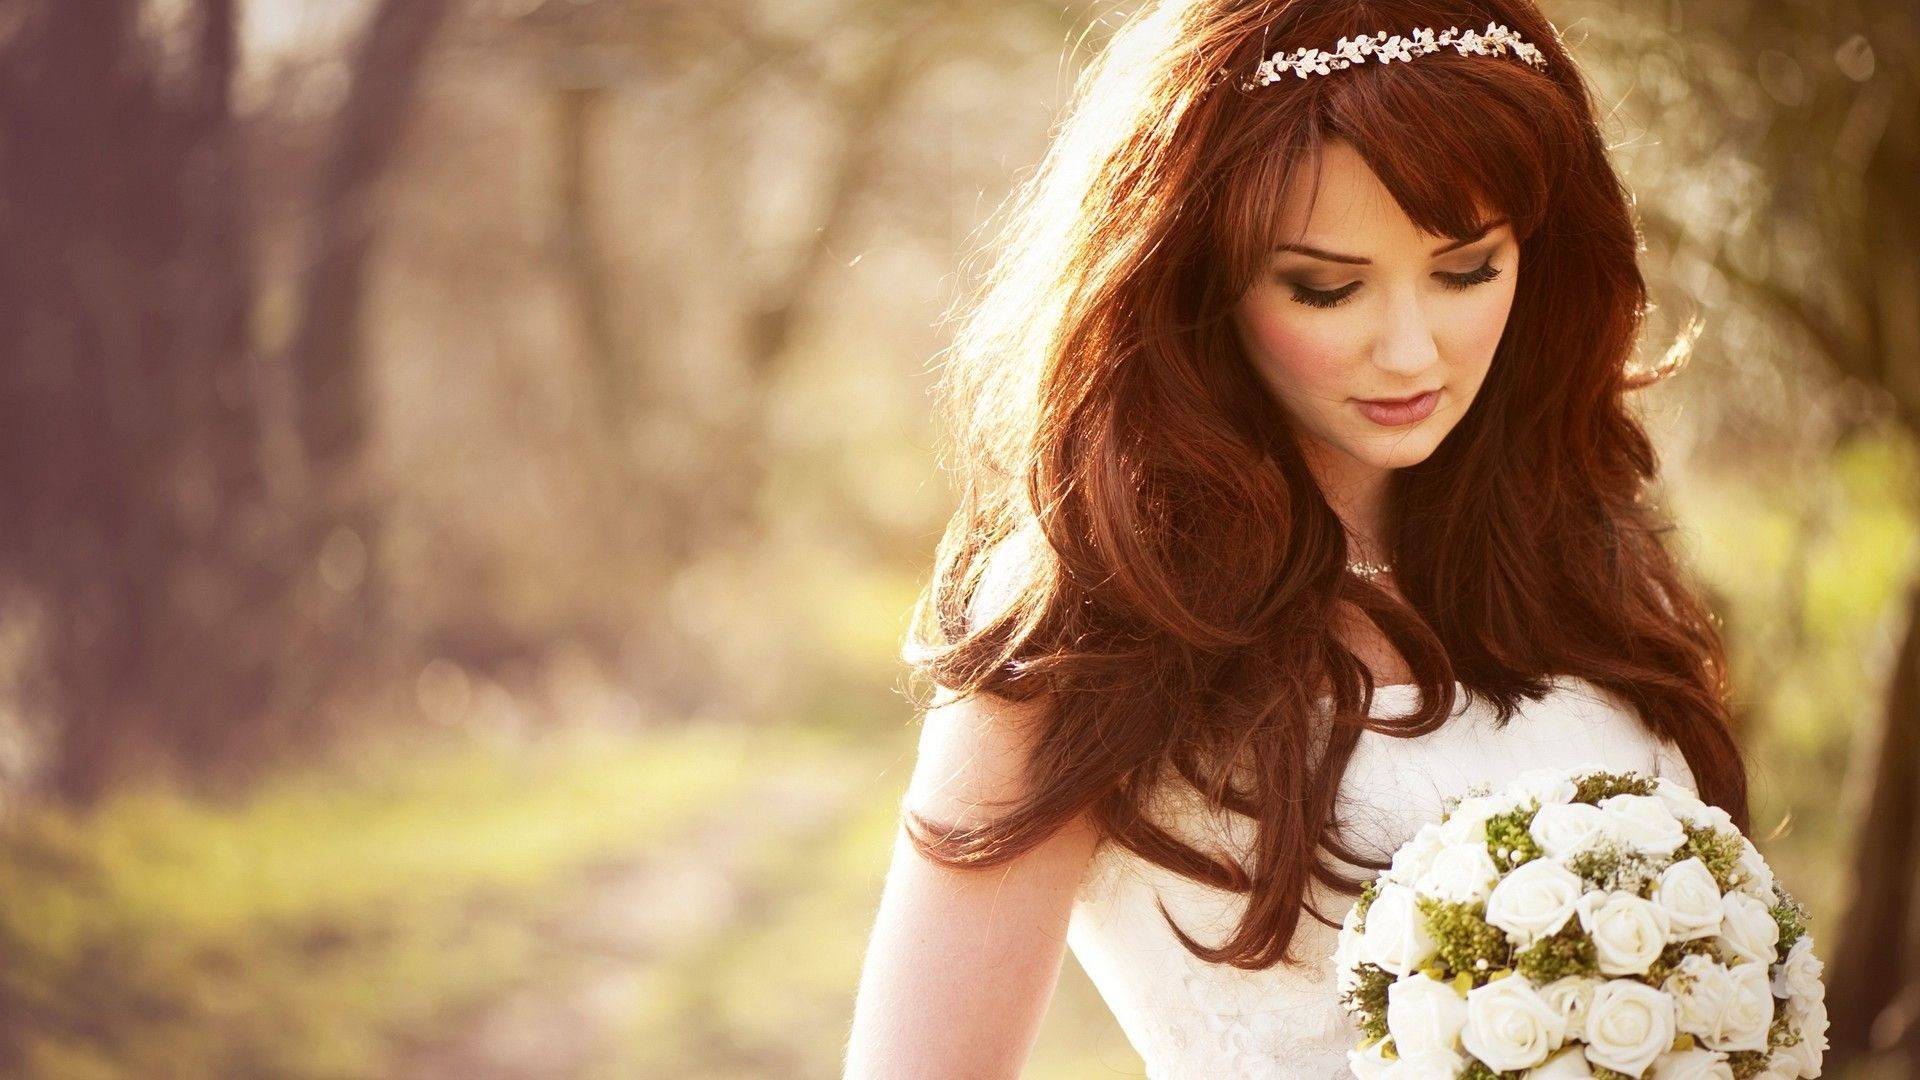 Super Stylish Wedding Hairstyles for Long Hair